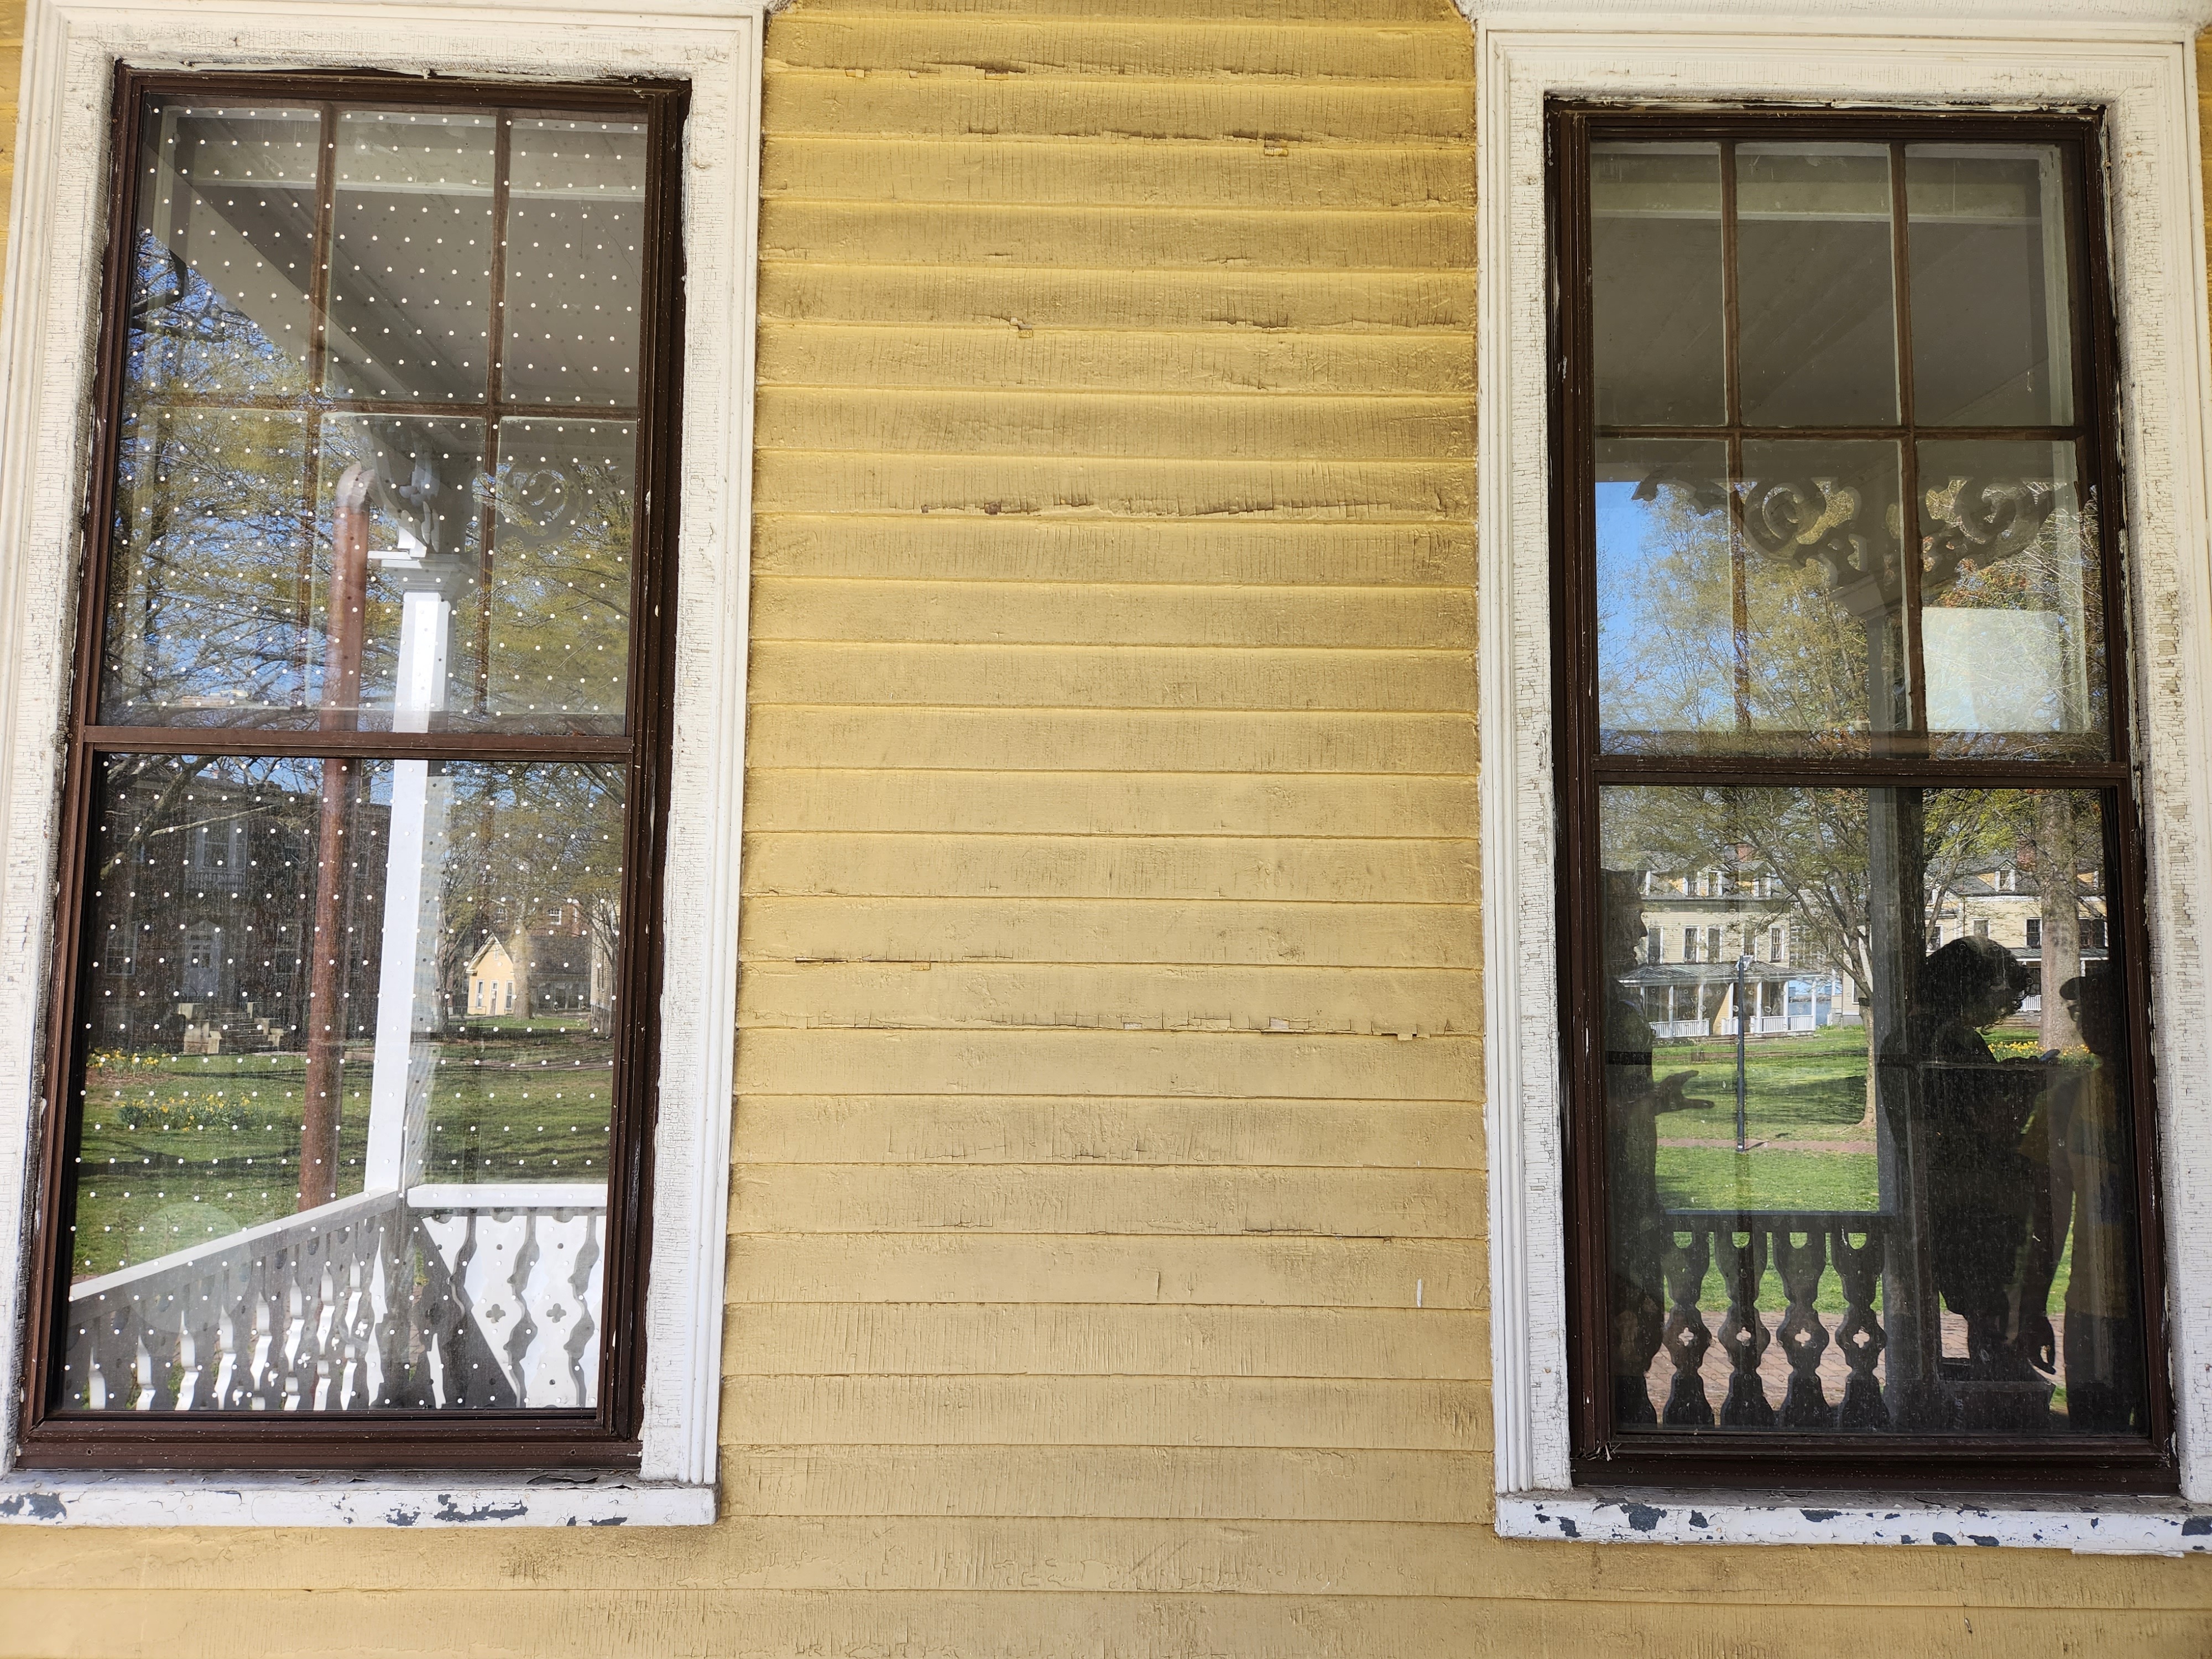 An image of two windows of NYC Audubon's seasonal environmental center on Governors Island treated by window film.